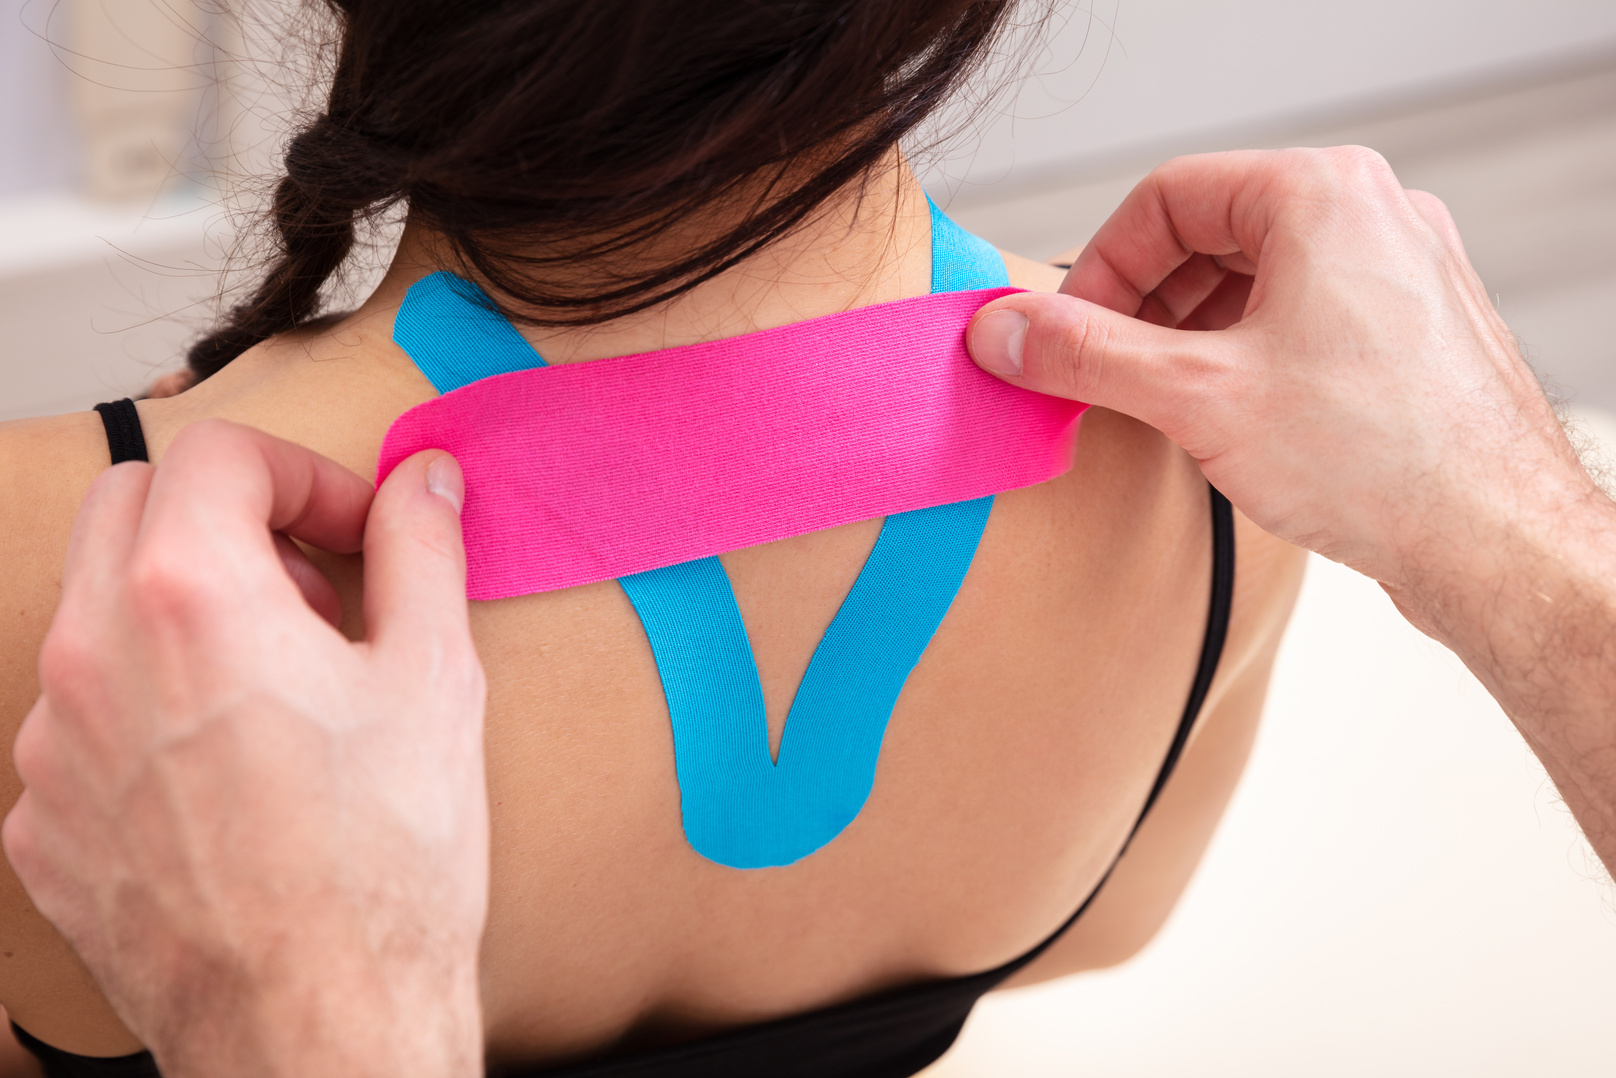 Special Physio Tape On Woman's Back